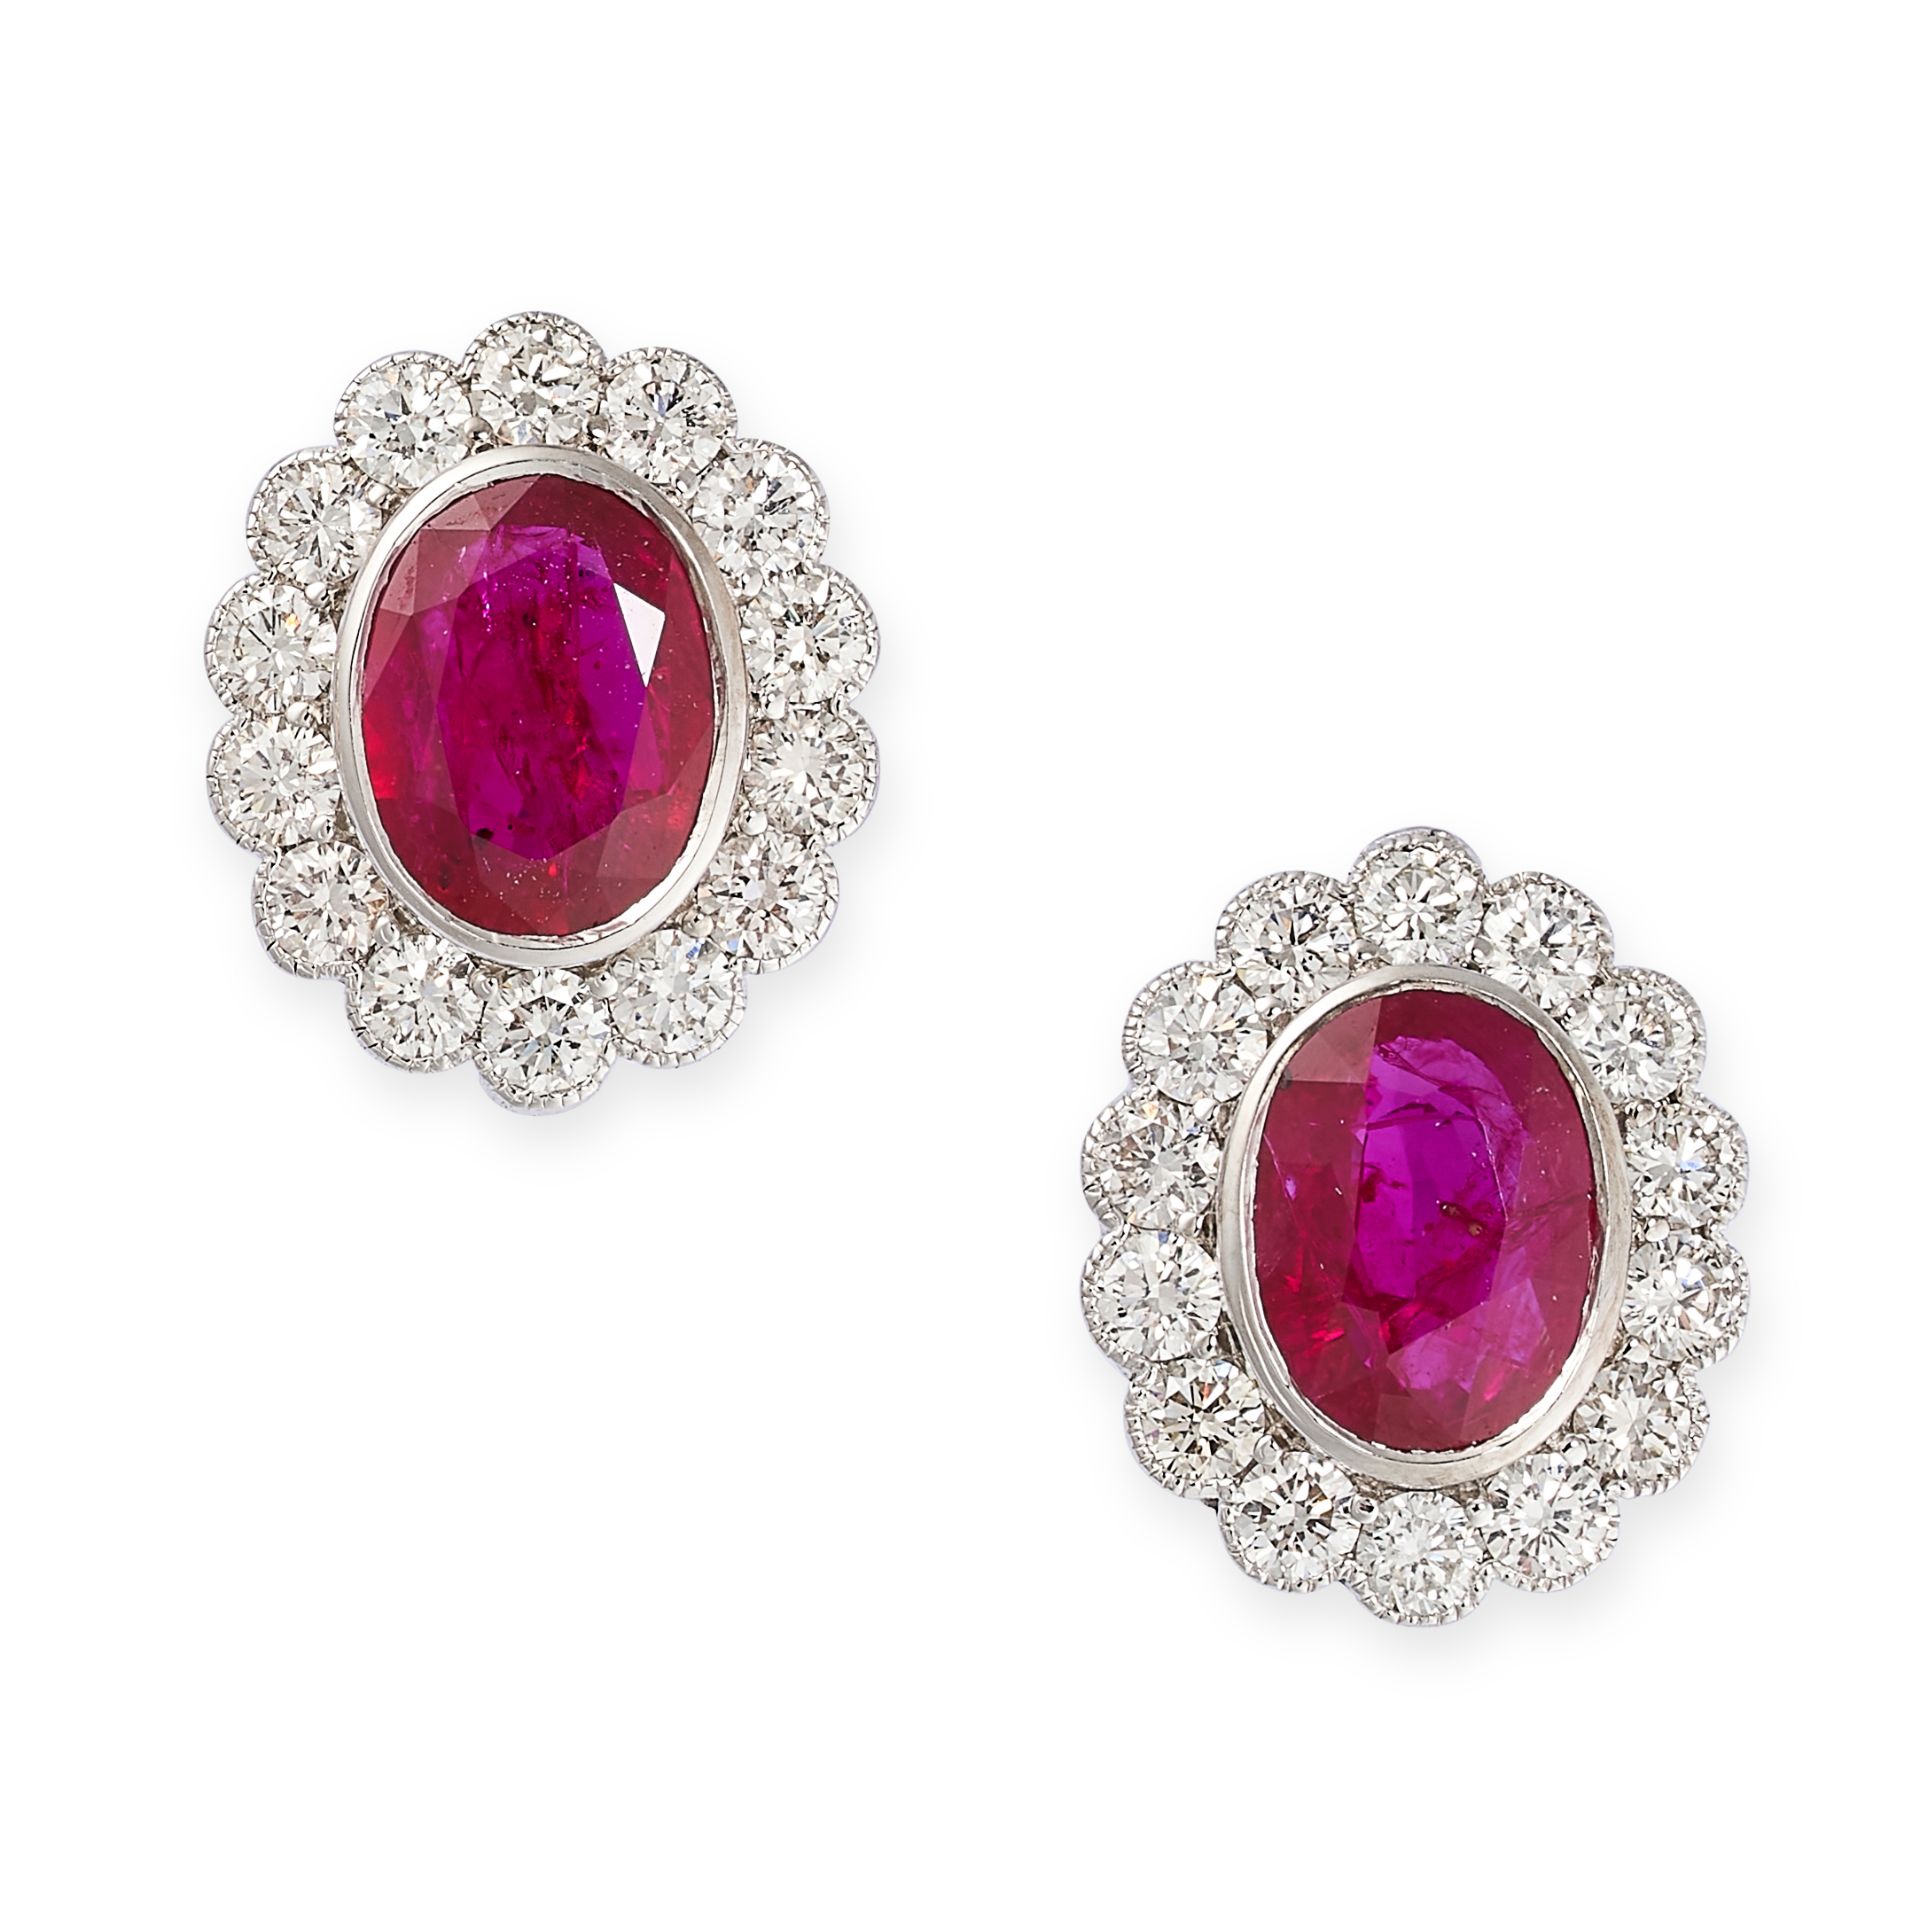 A PAIR OF RUBY AND DIAMOND CLUSTER EARRINGS in 18ct white gold, each set with an oval cut ruby, both